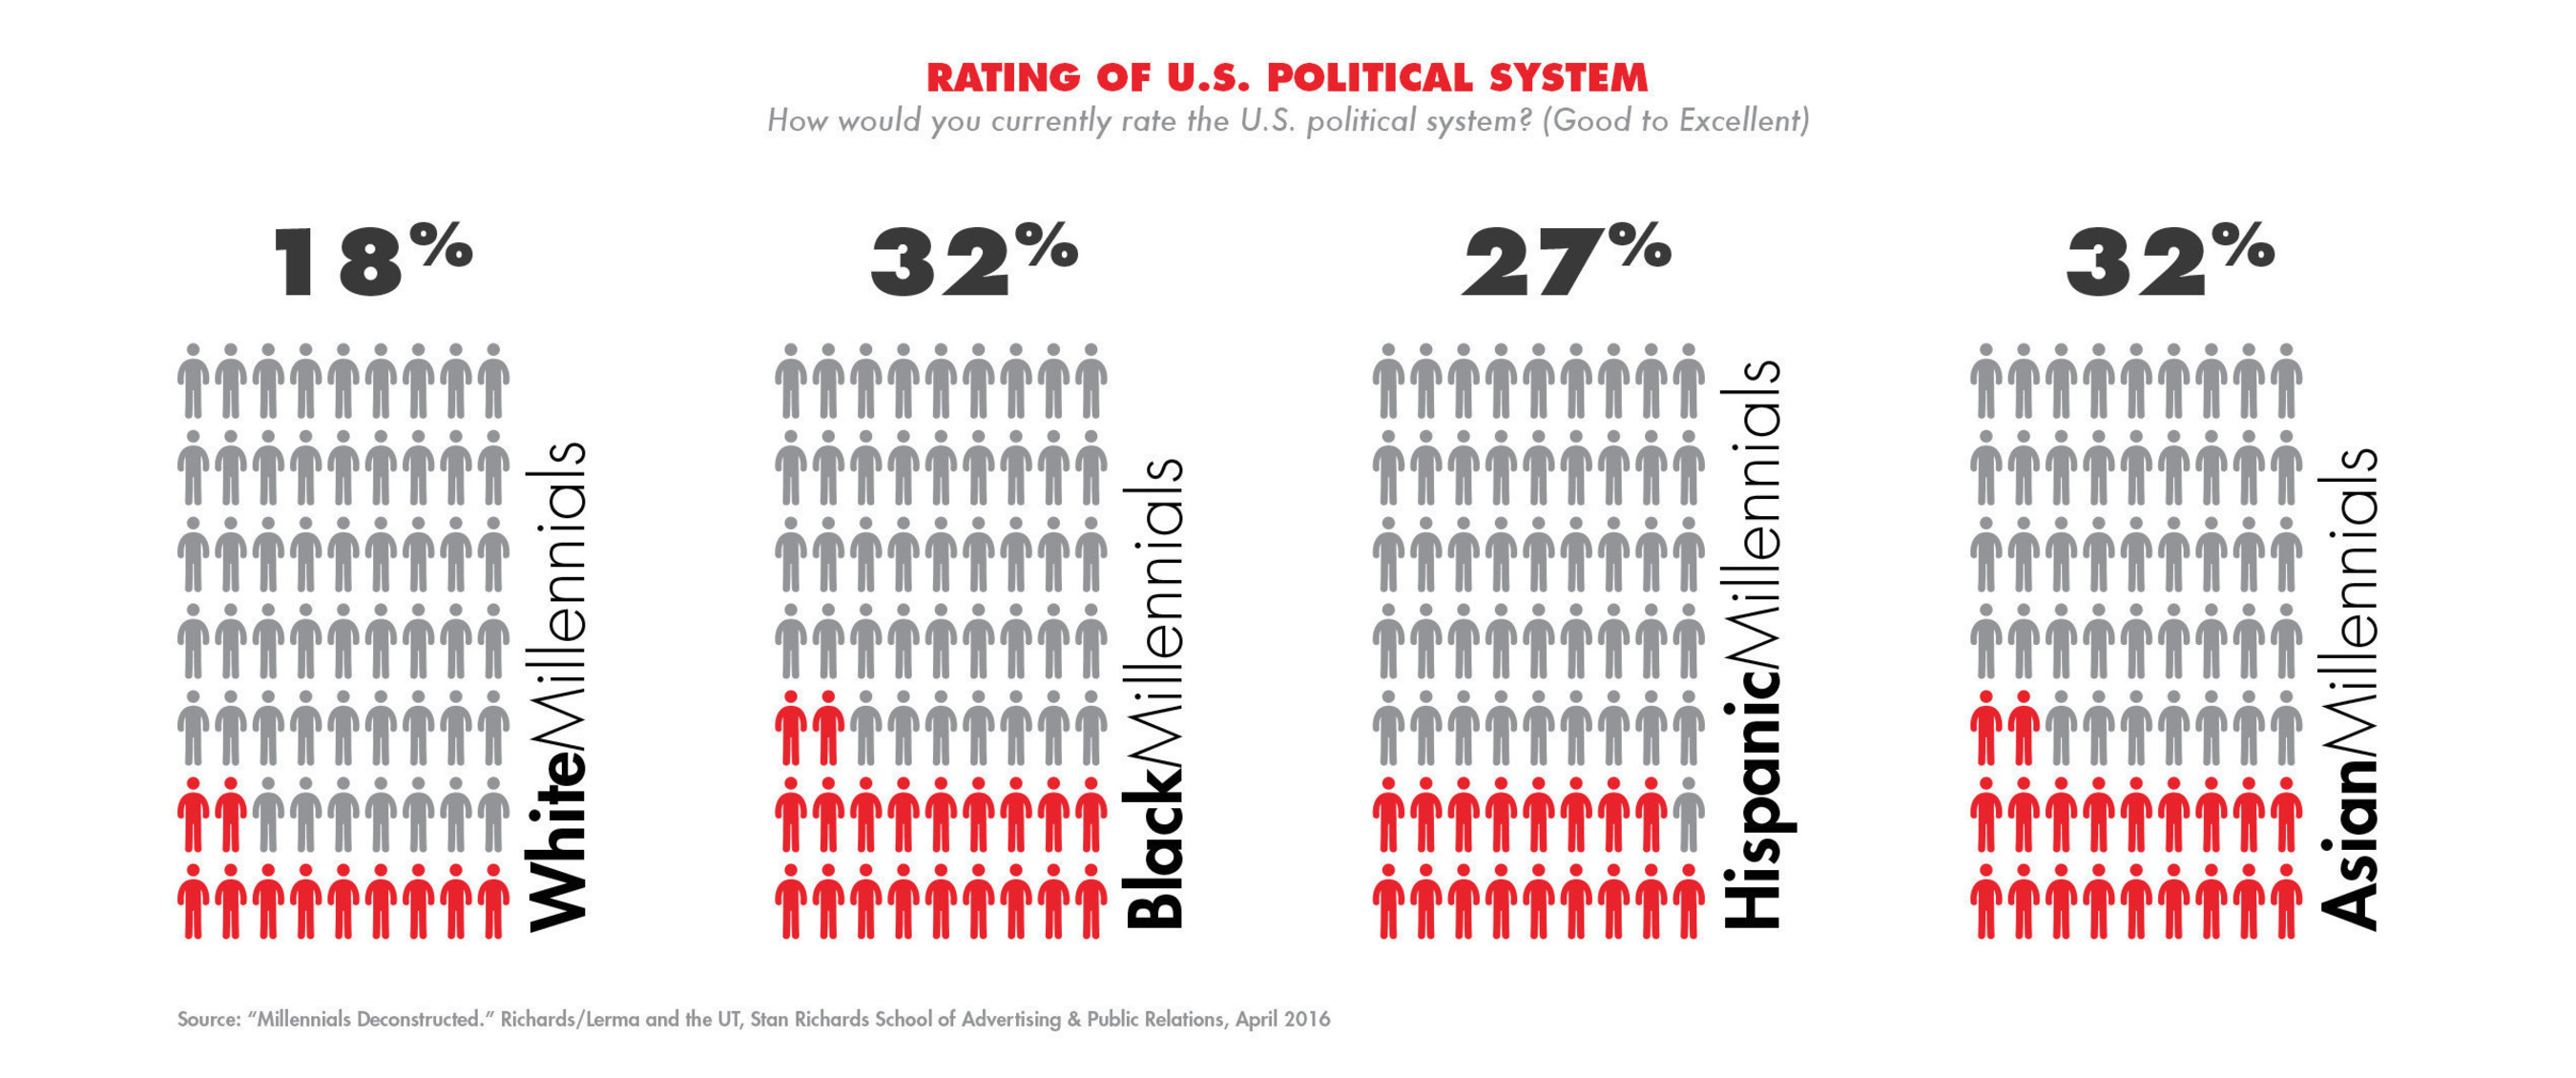 How would you rate the current U.S. political system?